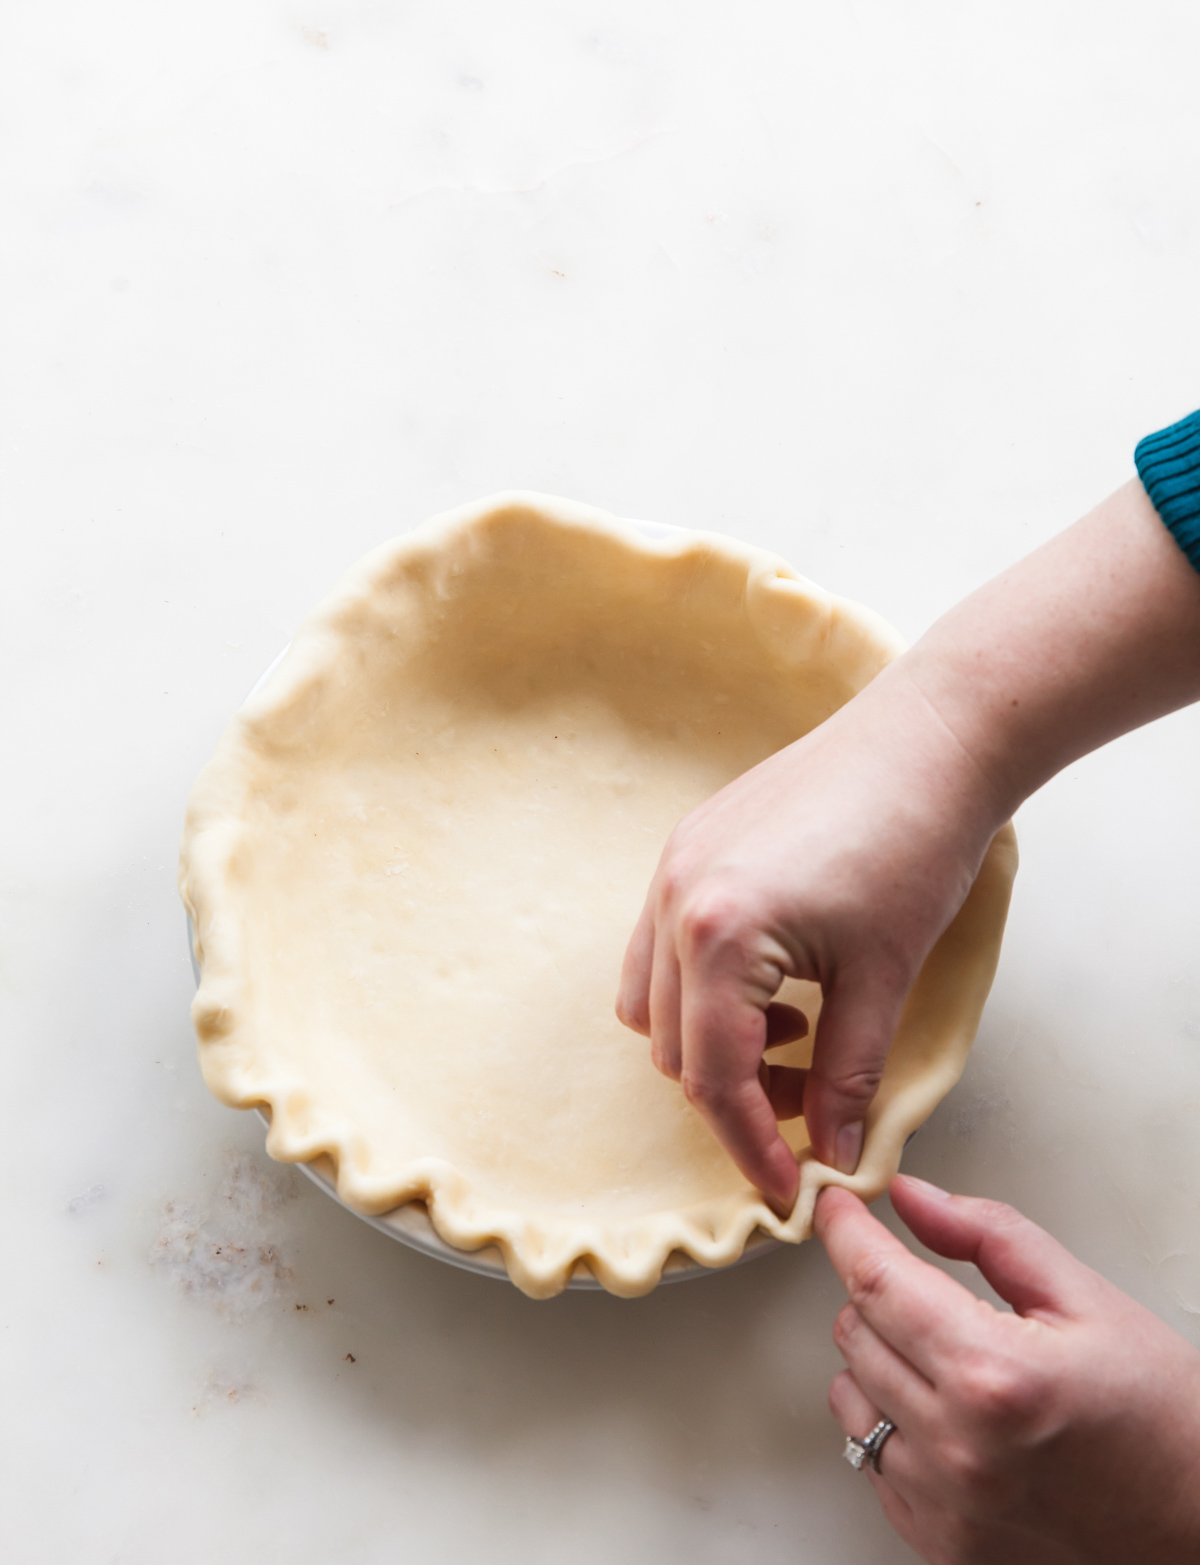 Crimping the edge of a an unbaked pie